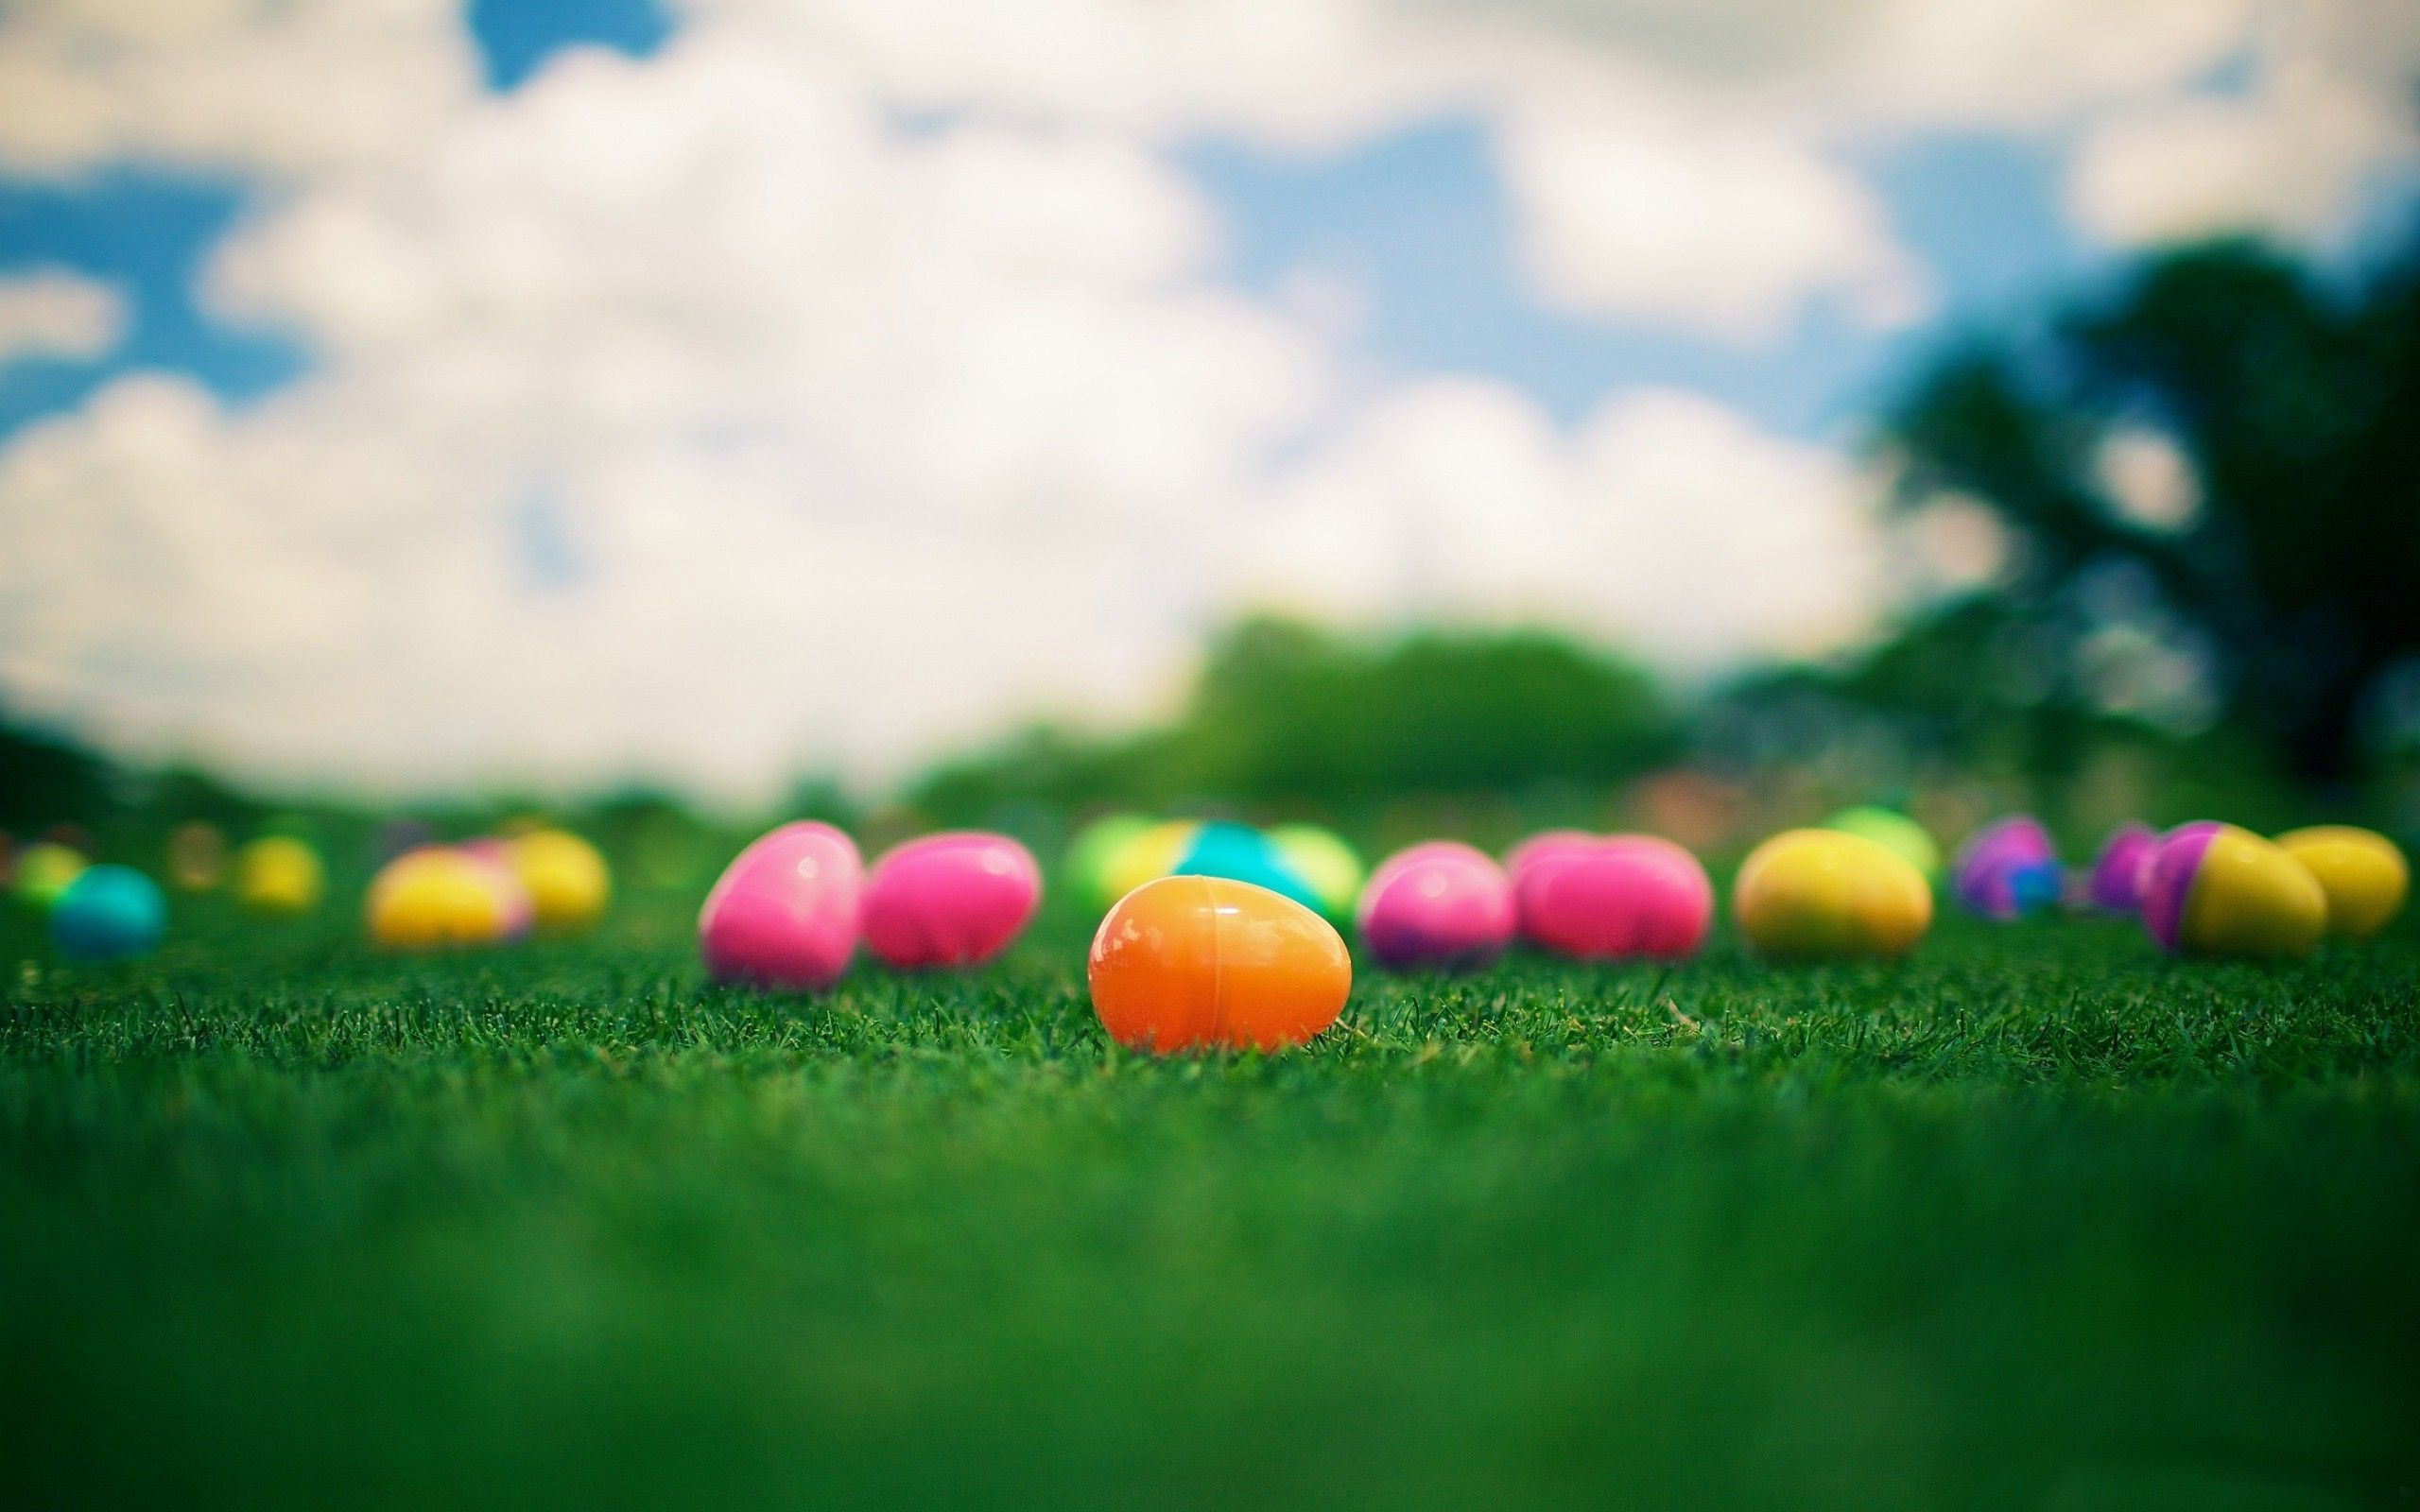 HD wallpaper, Easter, Eggs, Colorful